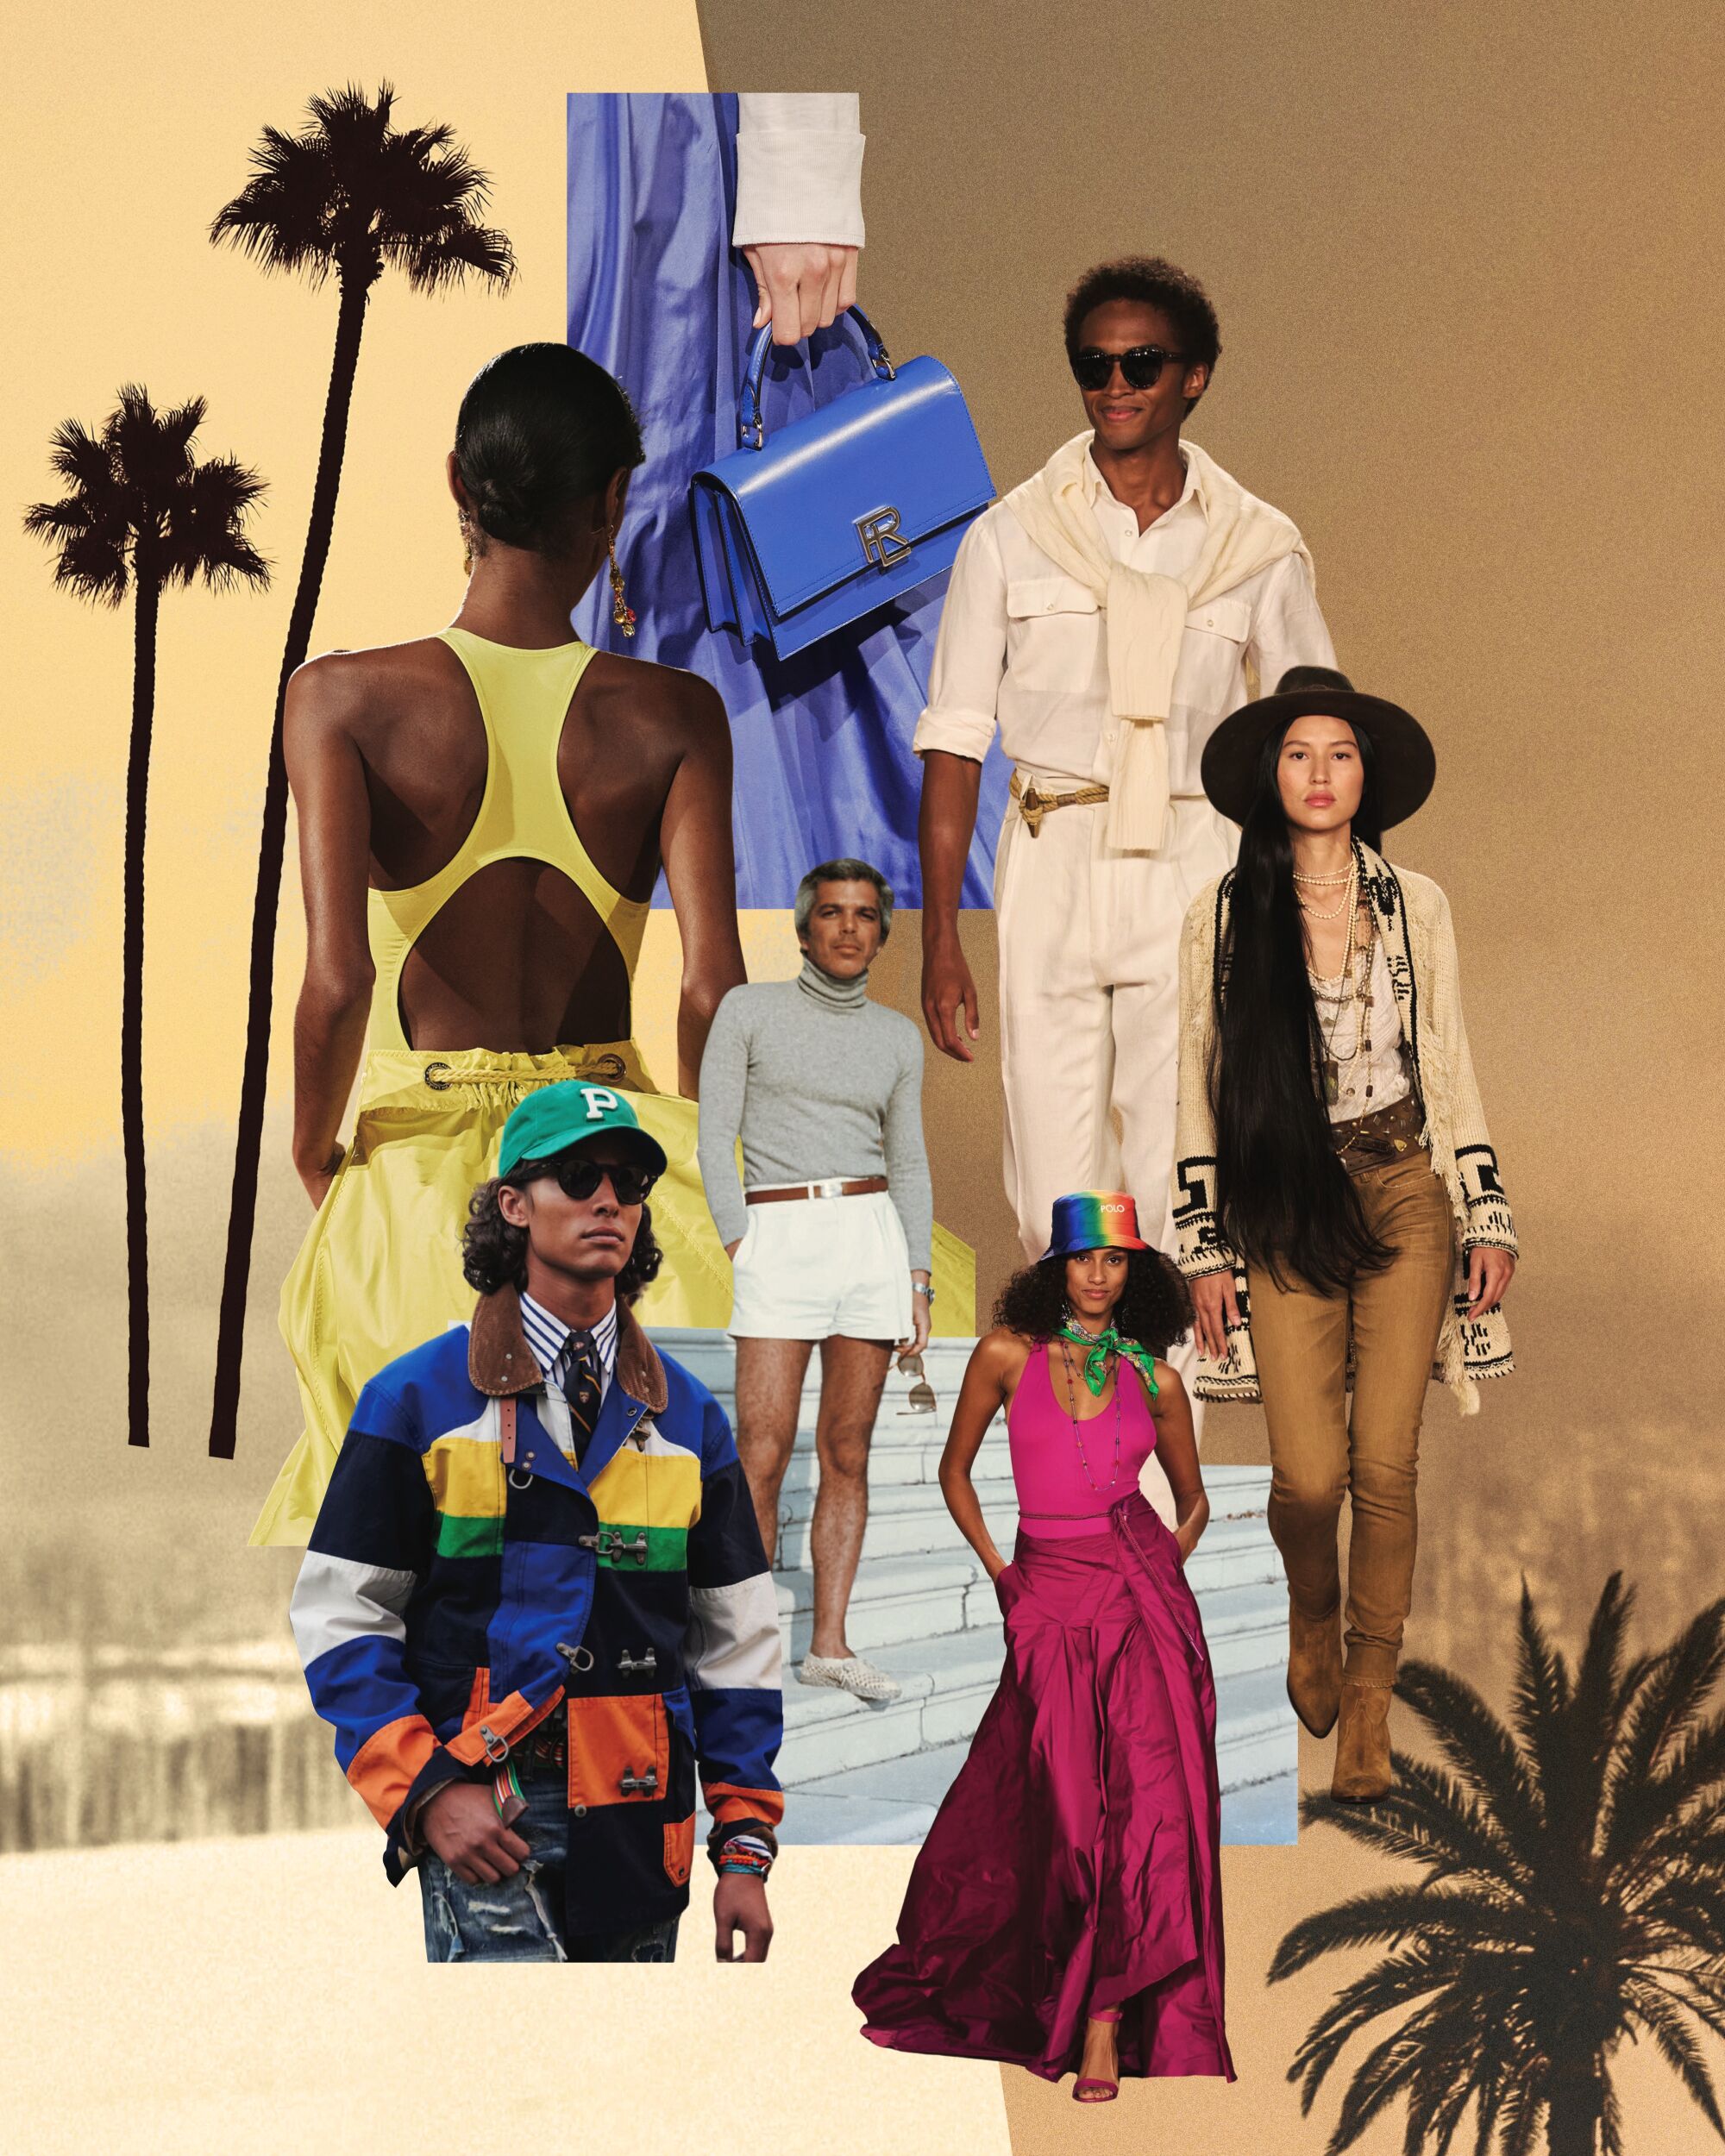 Collage of looks from Ralph Lauren SS23 on a sepia landscape background surrounded by palm trees.